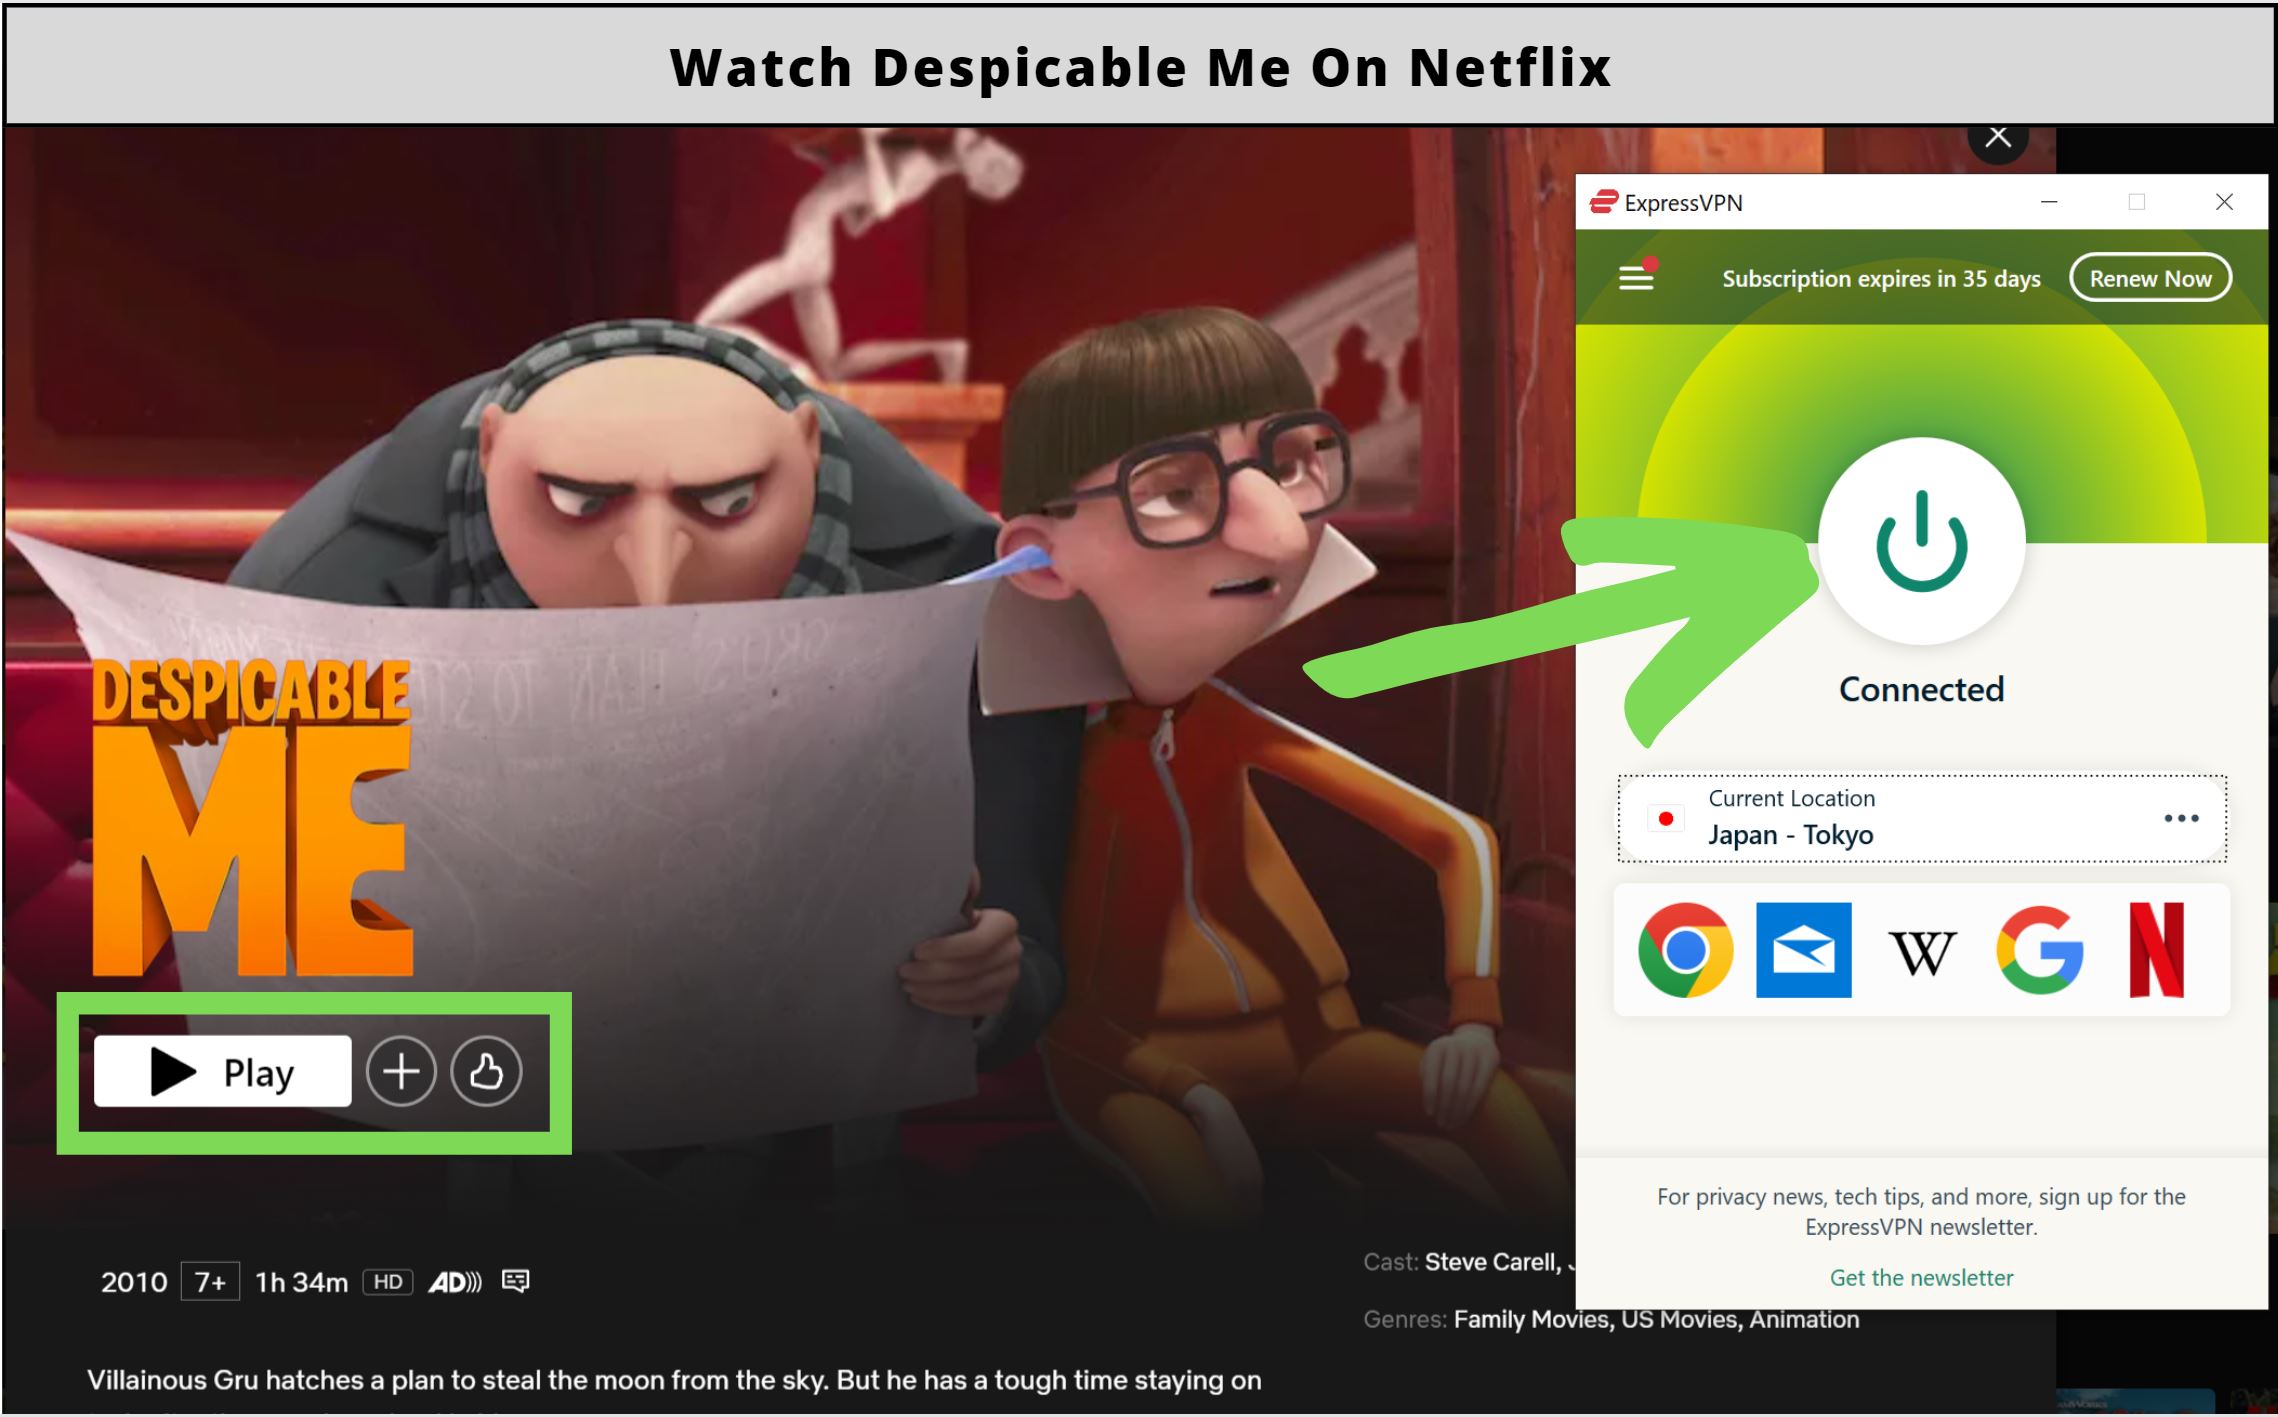 Watch Despicable Me on Netflix?